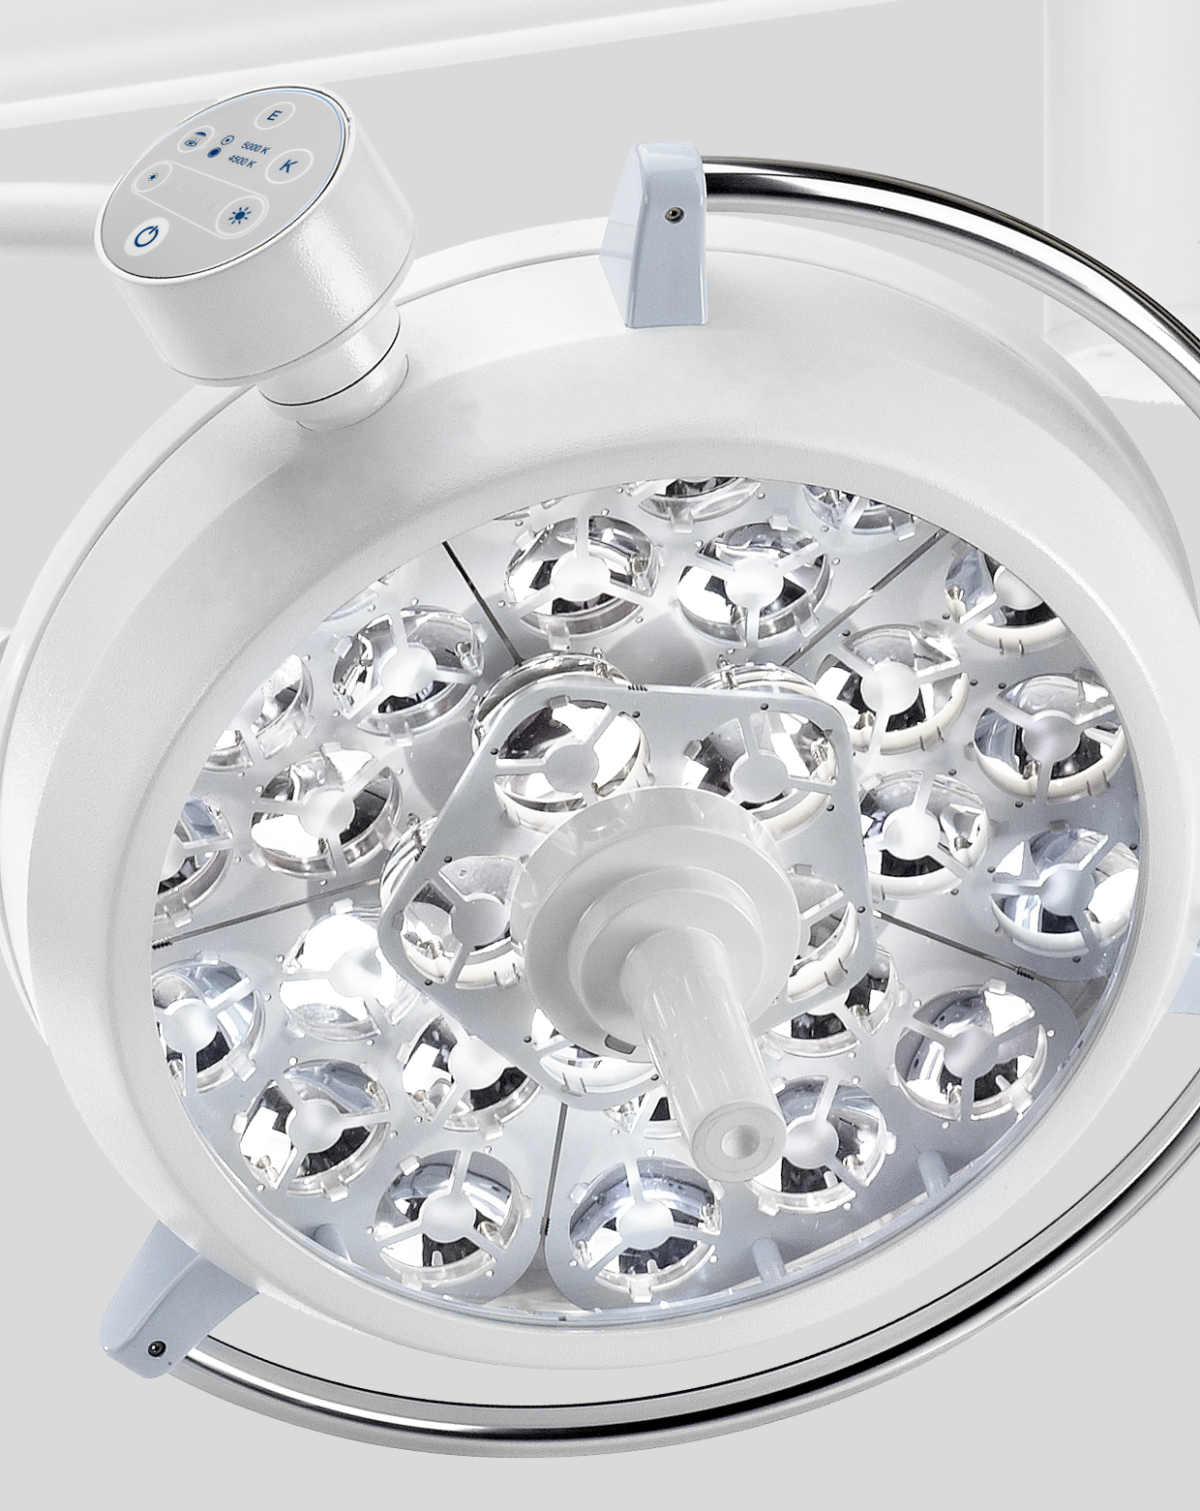 Pentaled 30 E is a scialytic led lamp for small surgery. It is part of the PENTALED E SERIES, and is particularly suitable in operating rooms where the lamp must be small in size in order not to interfere with other equipment hanging from the ceiling. It is ideal for maxillofacial surgery and cosmetic surgery.